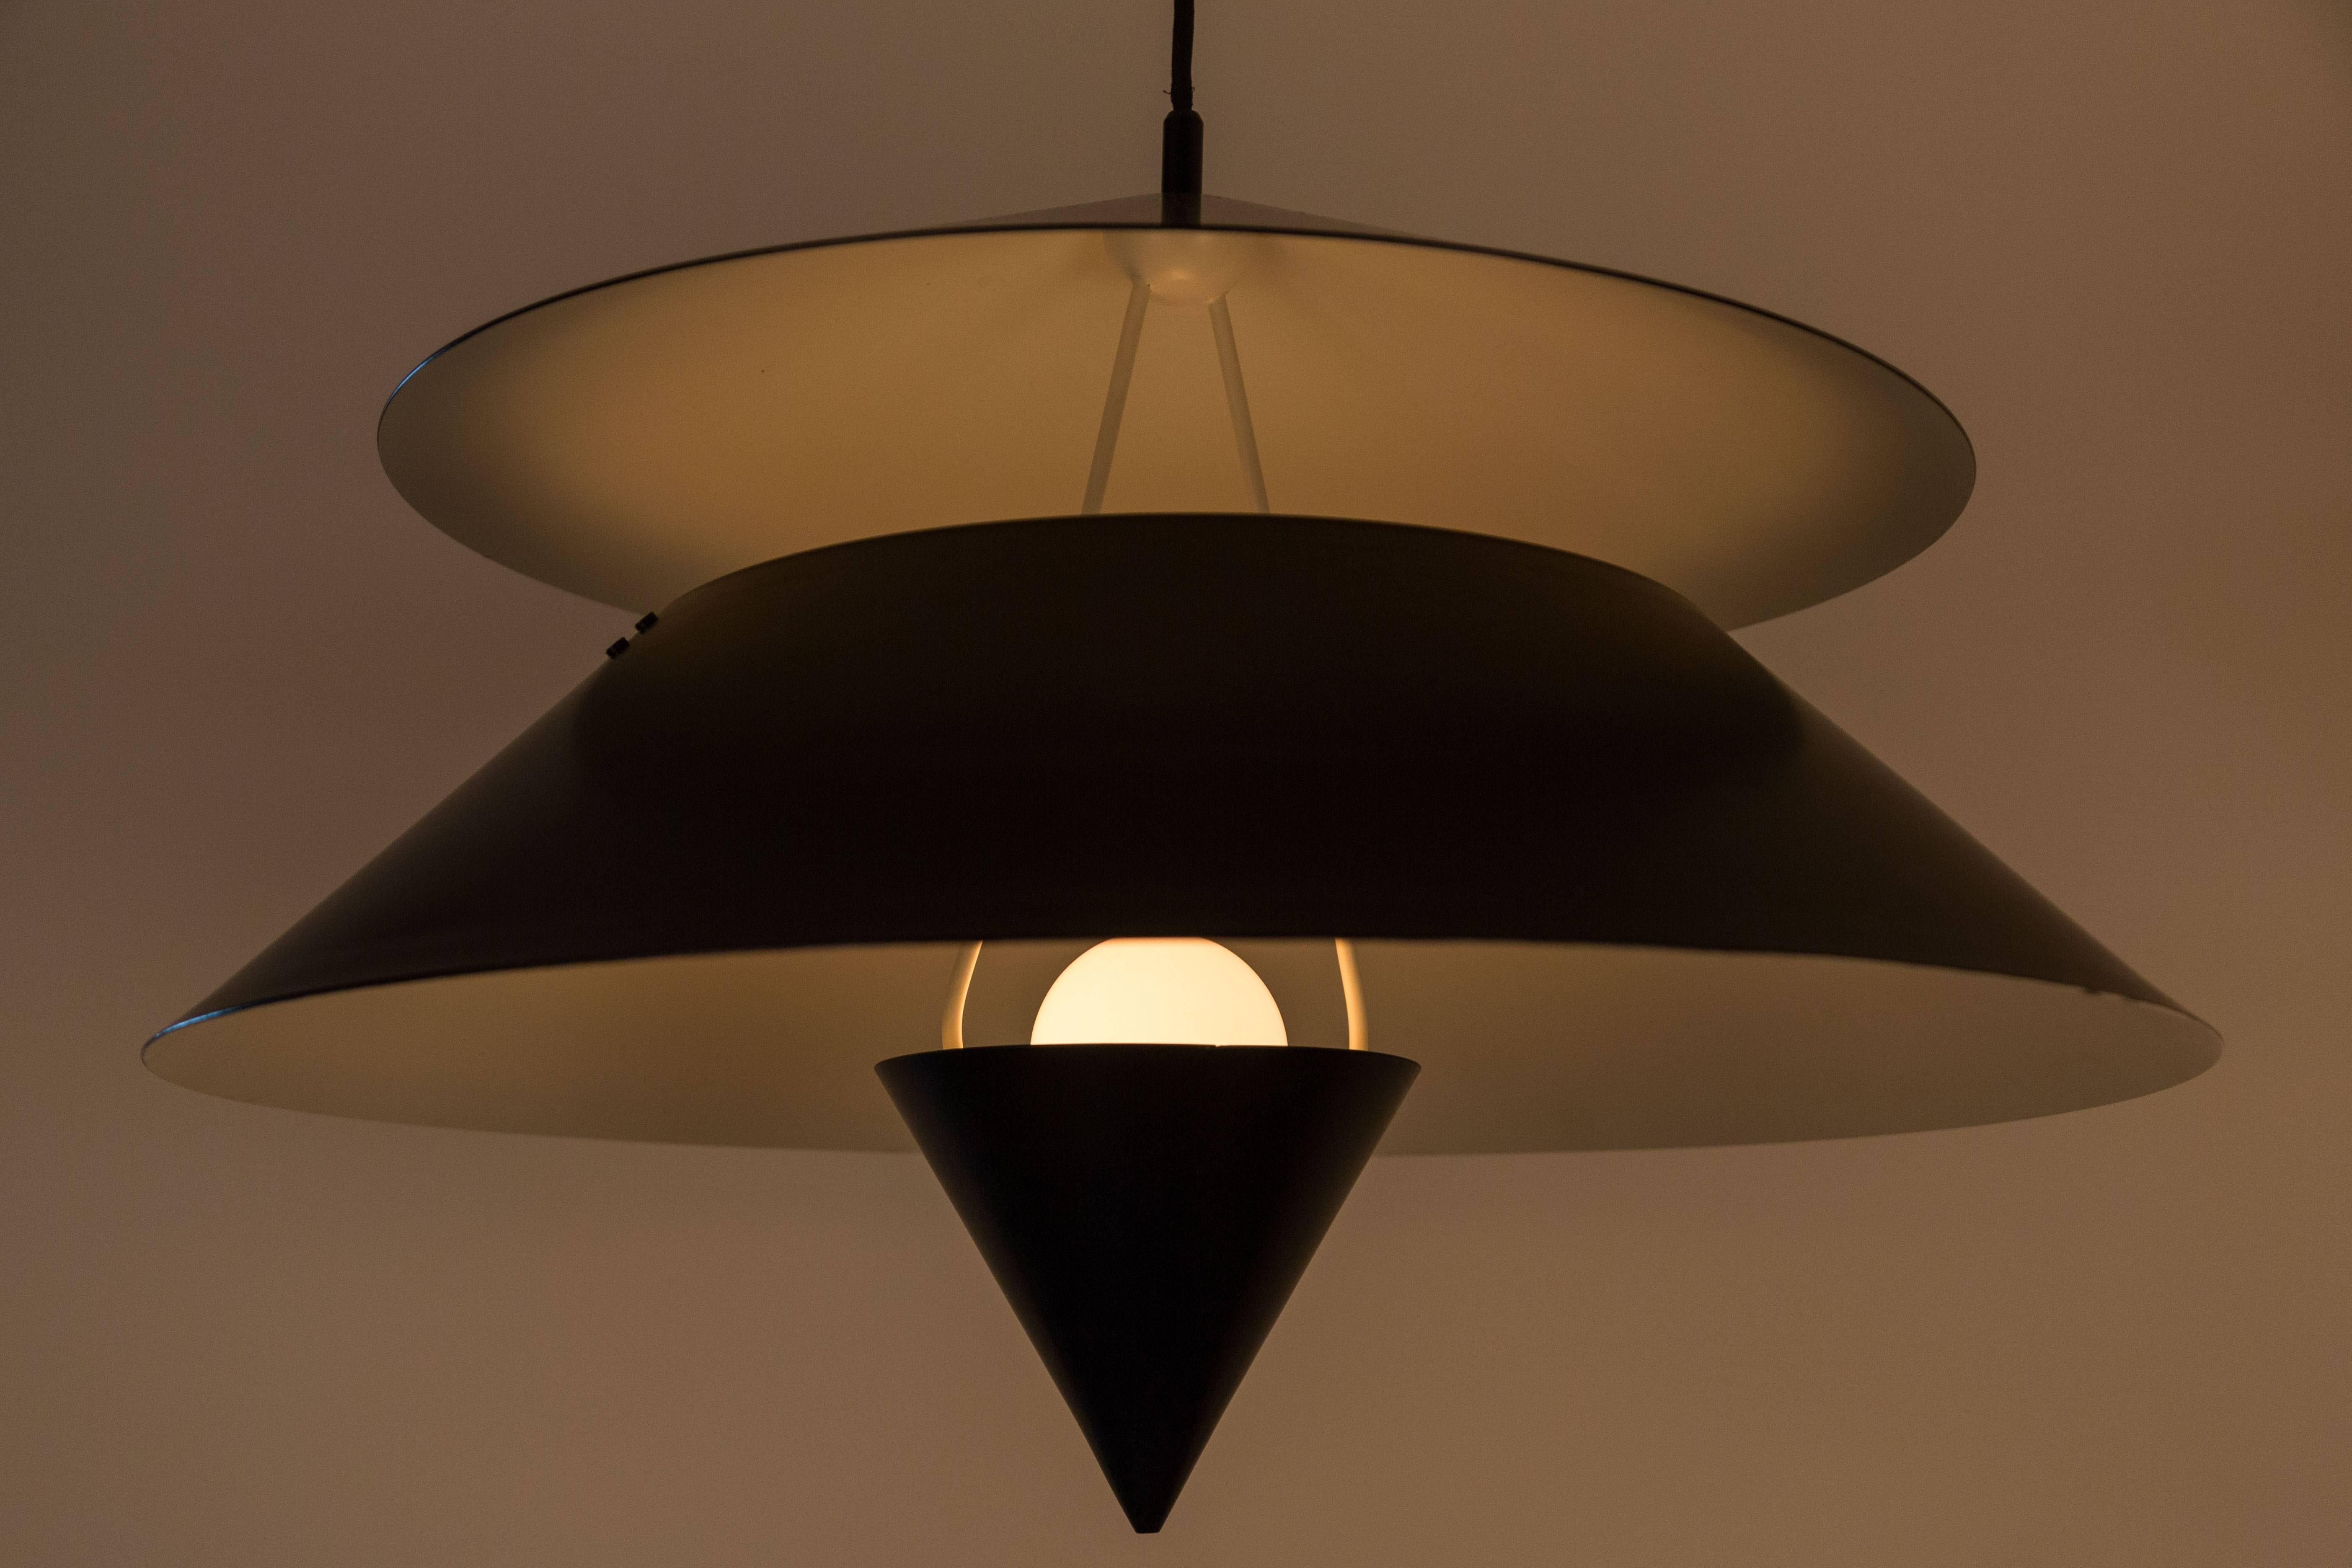 Akaari painted metal pendant designed by Vico Magistretti for Oluce. E27 75w maximum bulb. Overall drop can adjusted.

